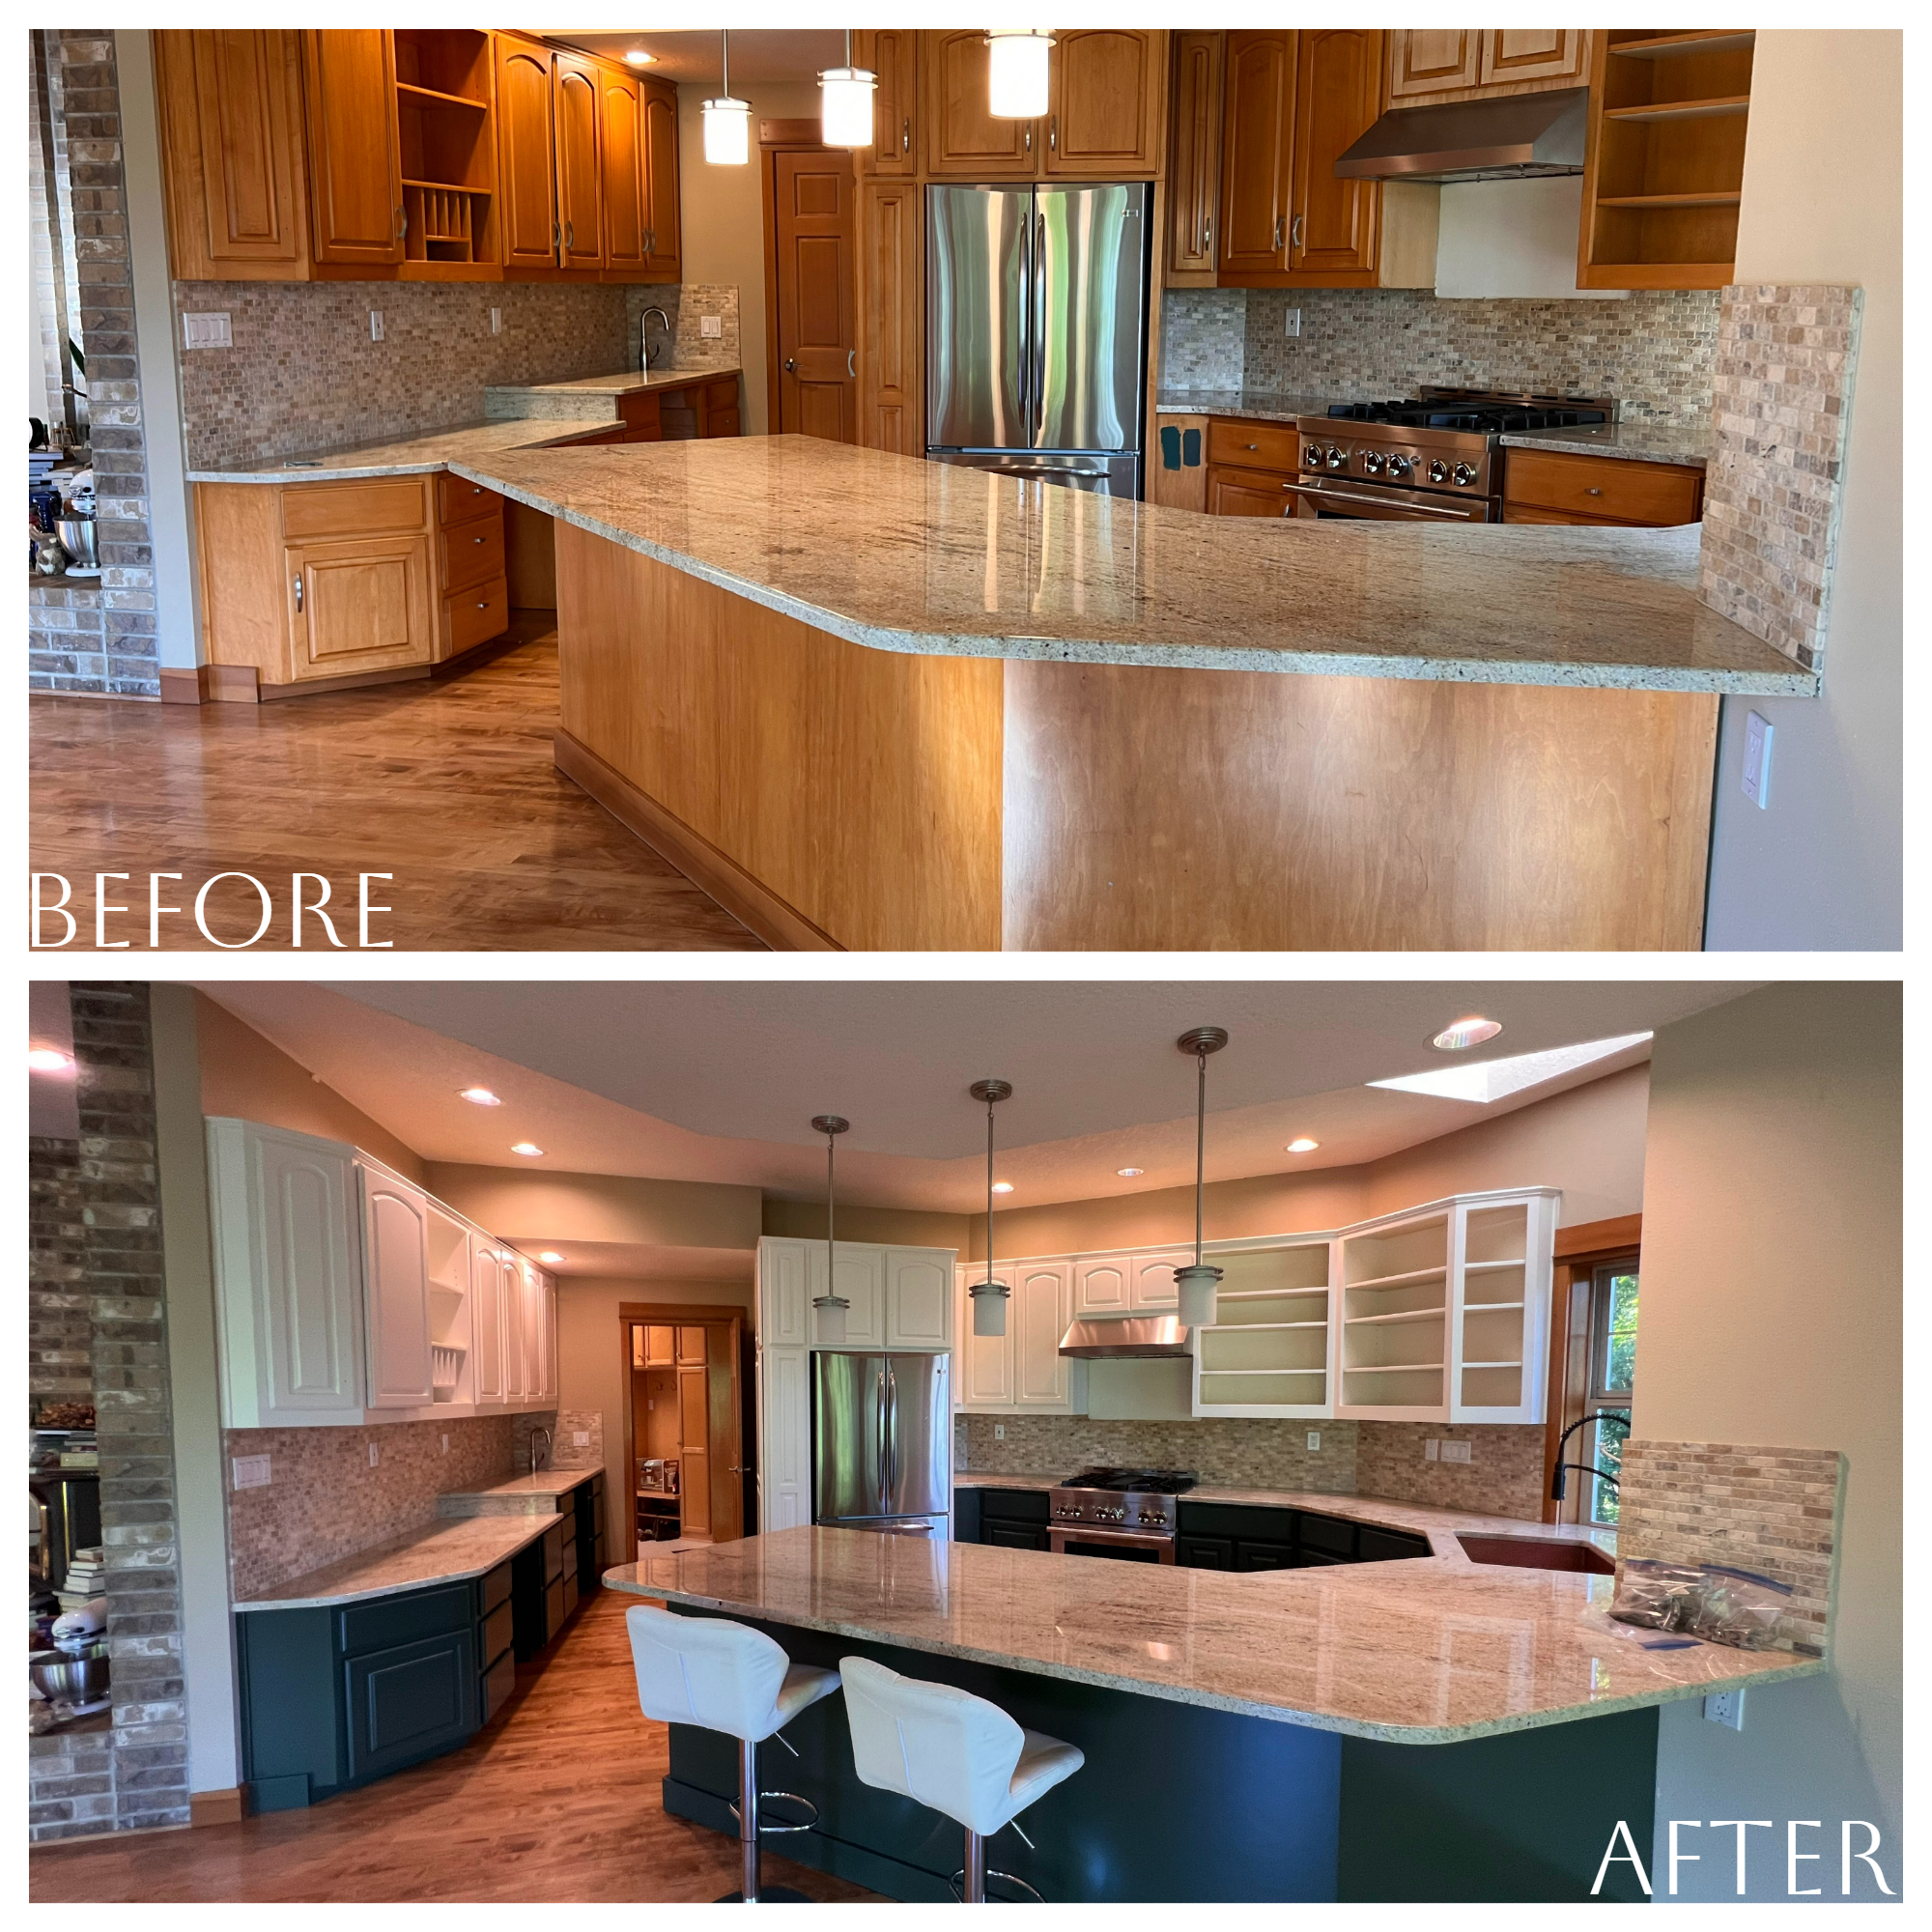 Before and after pictures of an Indoor Elegance kitchen transformation.